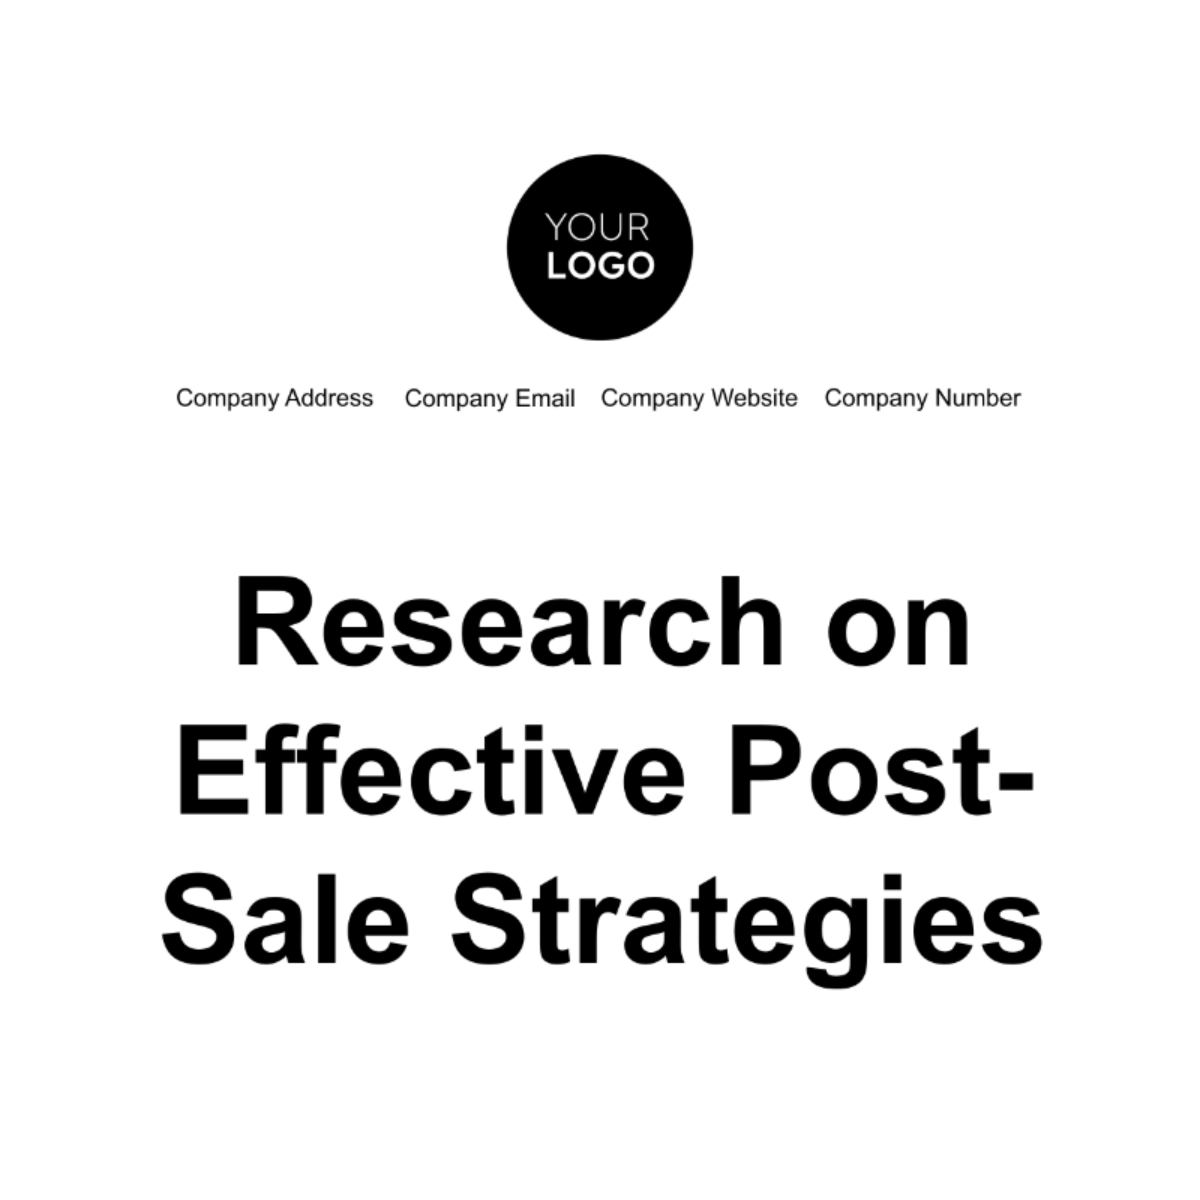 Research on Effective Post-Sale Strategies Template